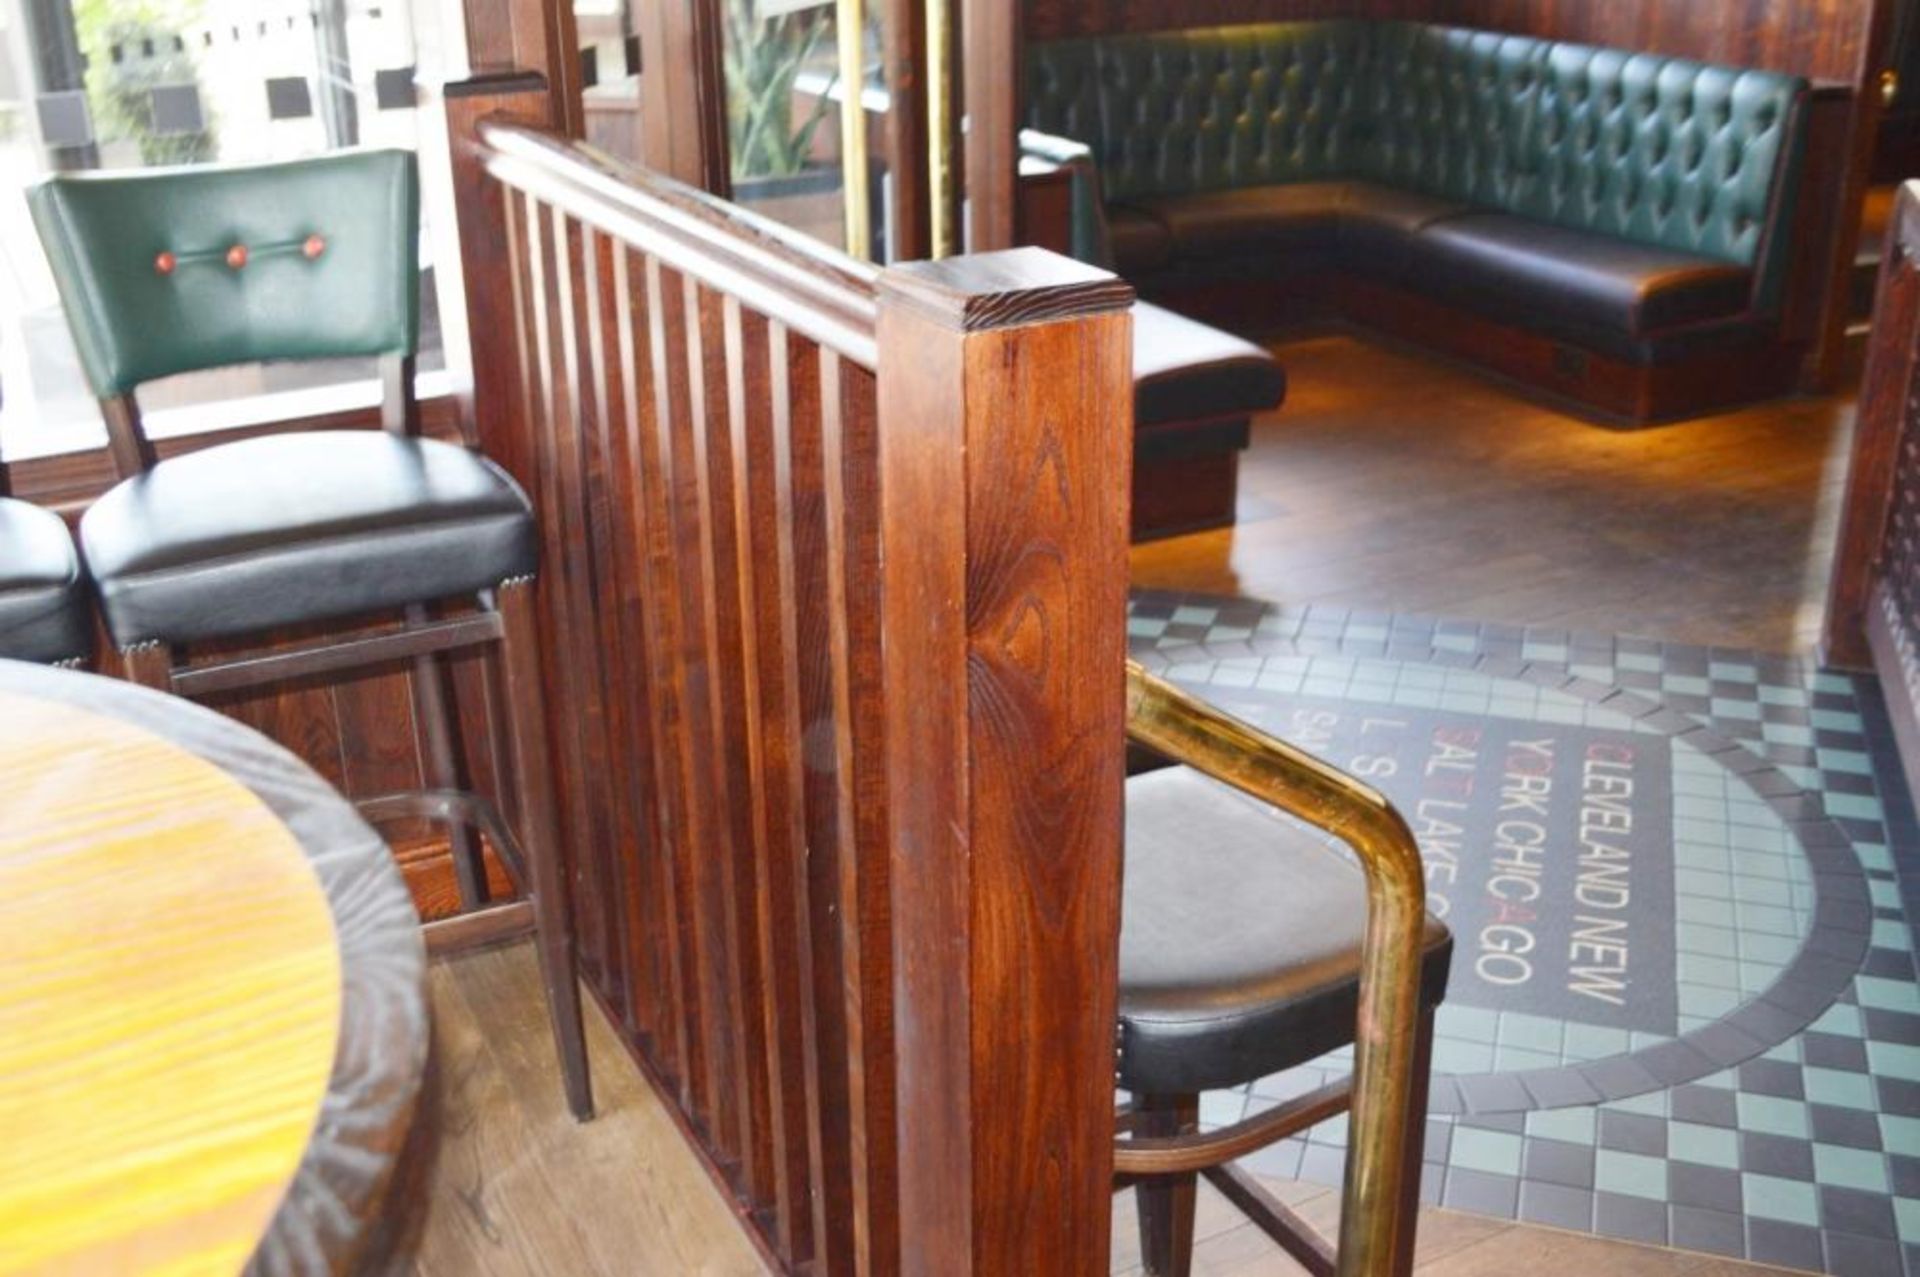 2 x Post Rail Dividers With Seating Bench and Brass Hand Rail - Mahogany Finish - H117 x W141cms - Image 2 of 6